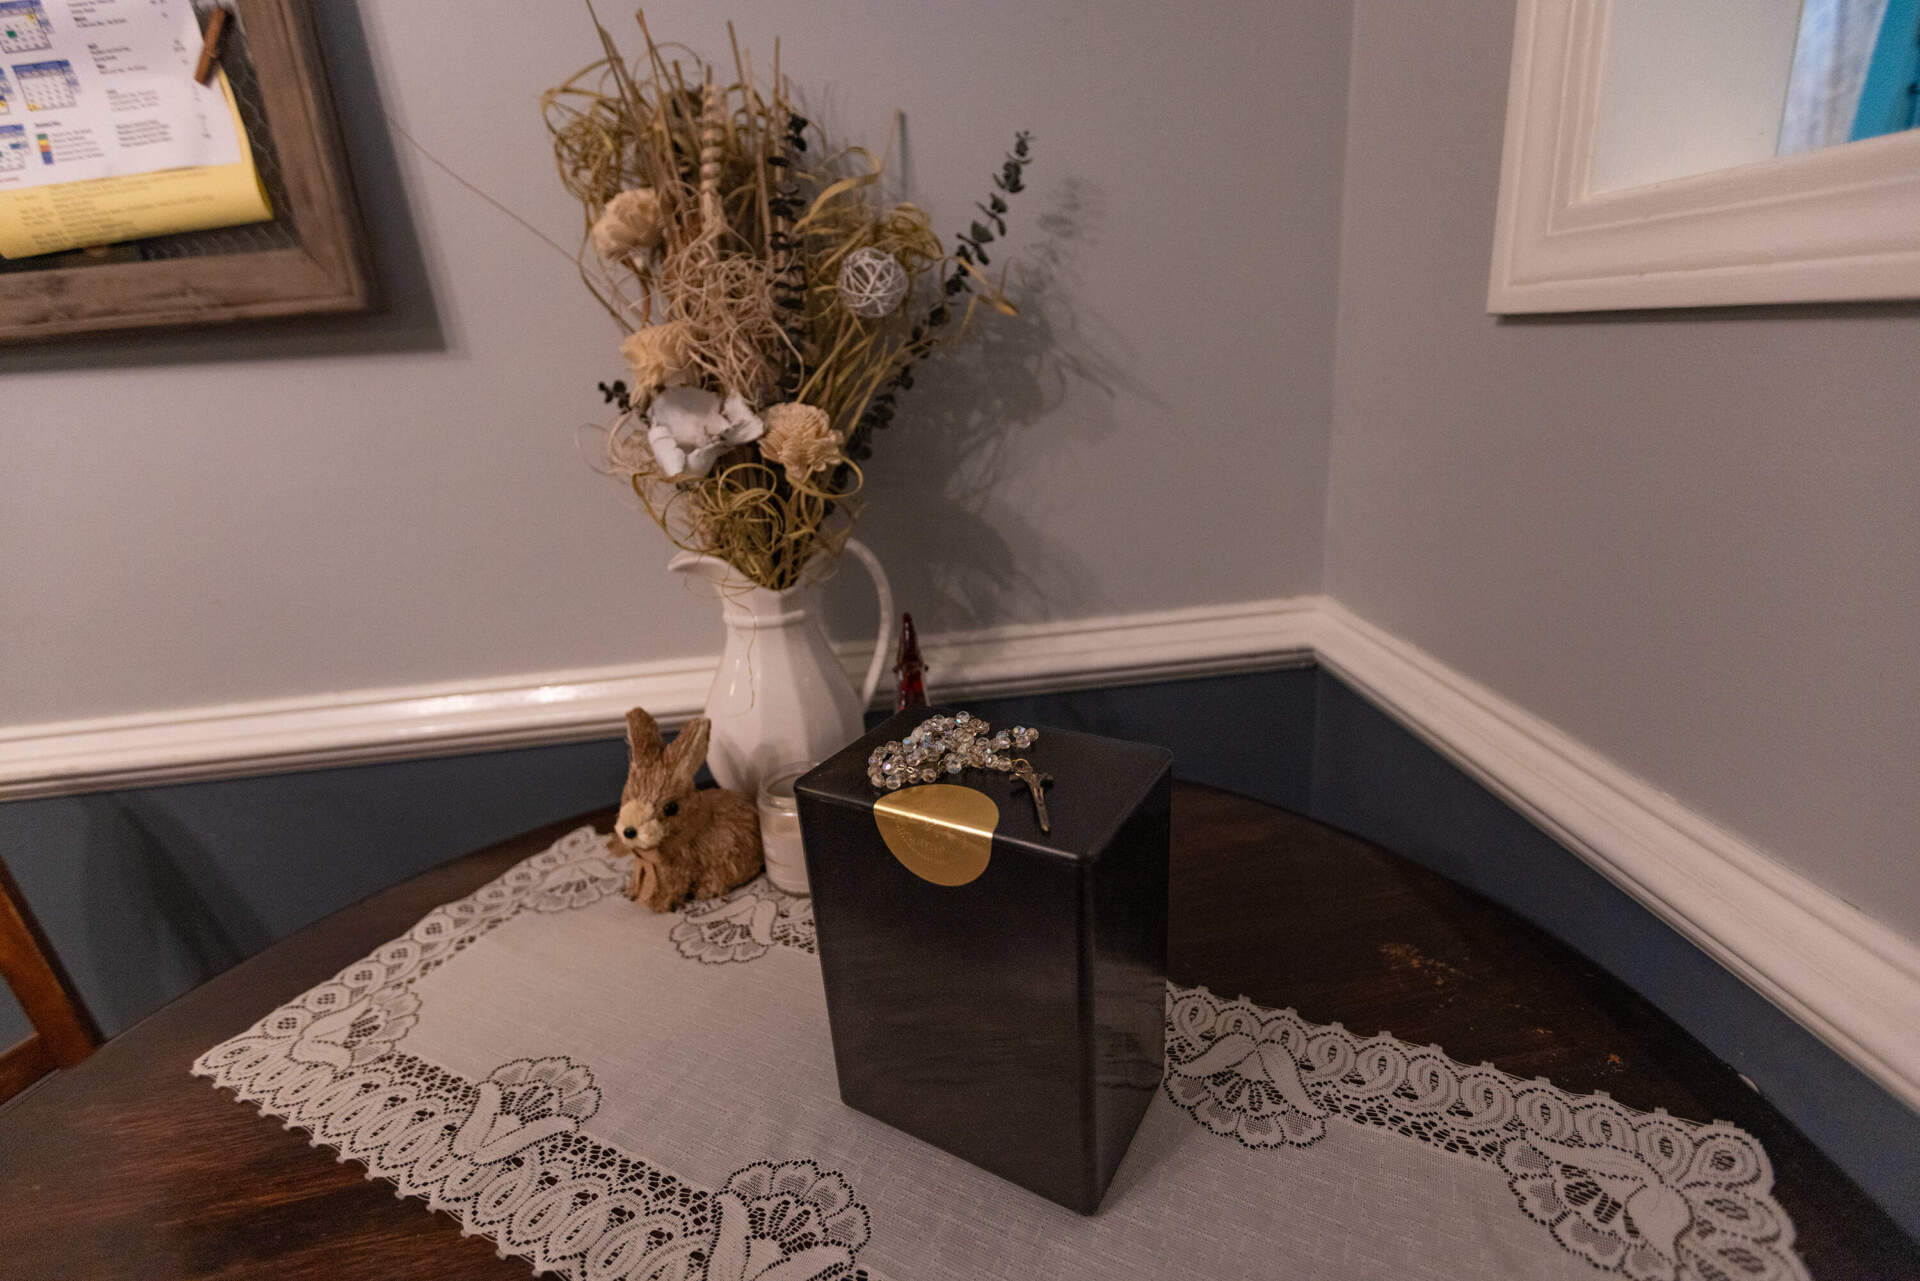 The ashes of Amber Haggstrom’s mother, Donna Pratt, sit in a box at her New Hampshire home. Pratt donated her body to Harvard Medical School. (Jesse Costa/WBUR)